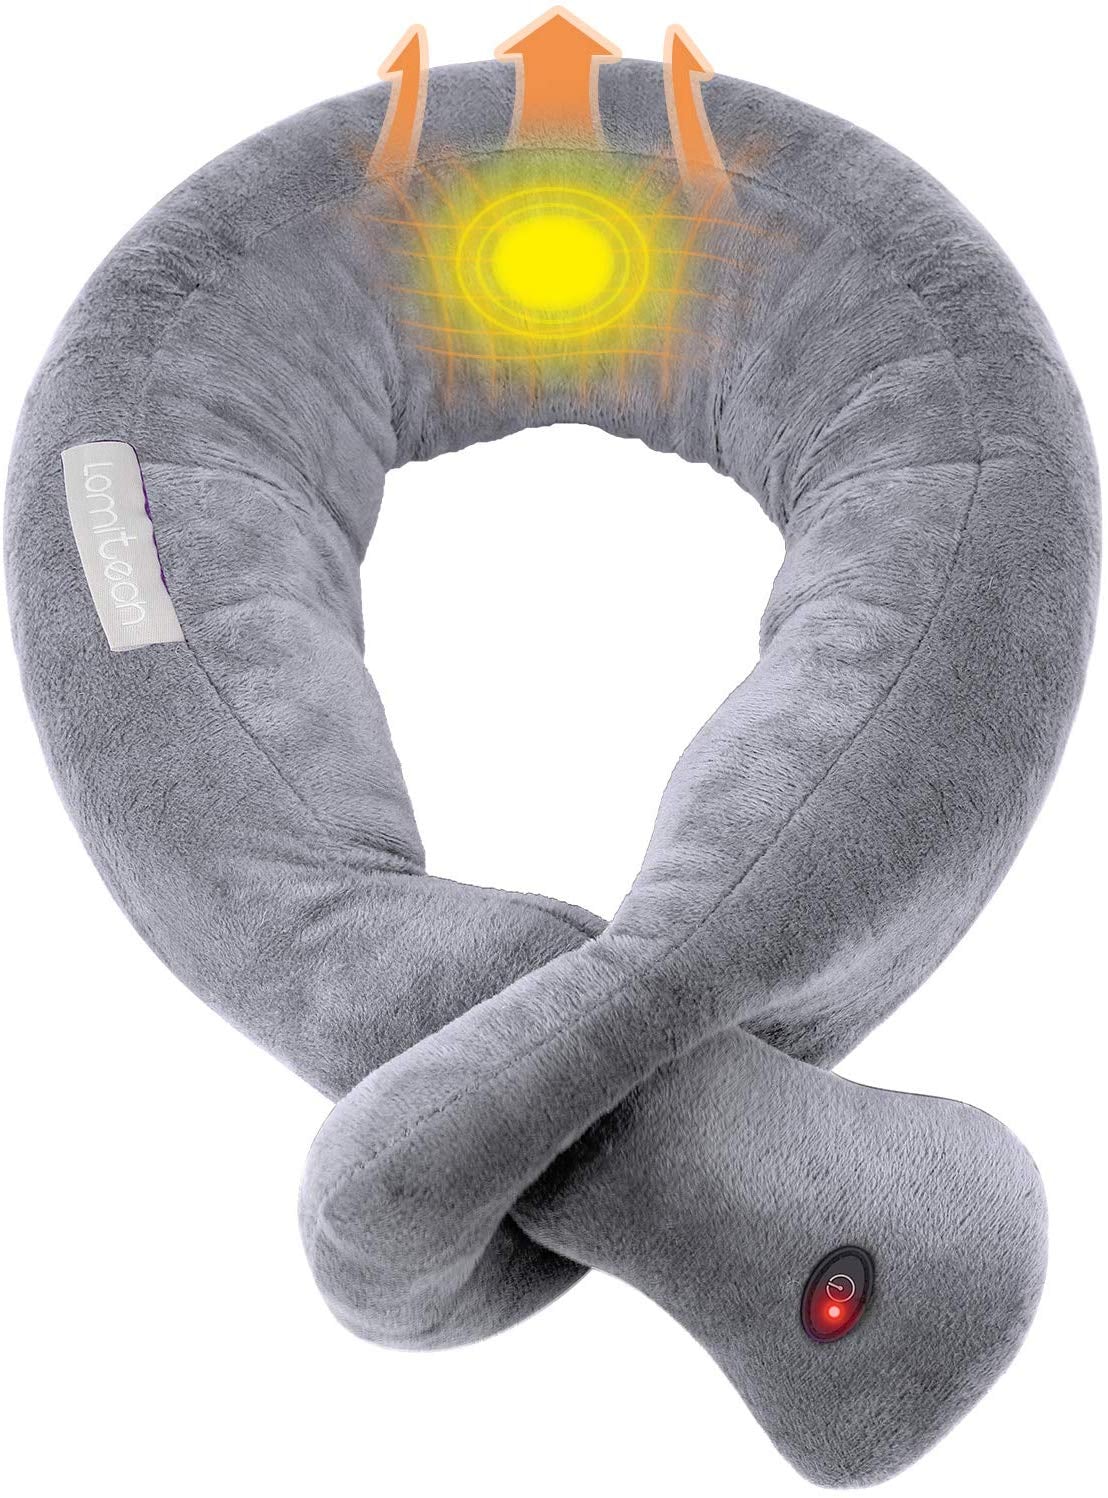 heated travel neck pillow